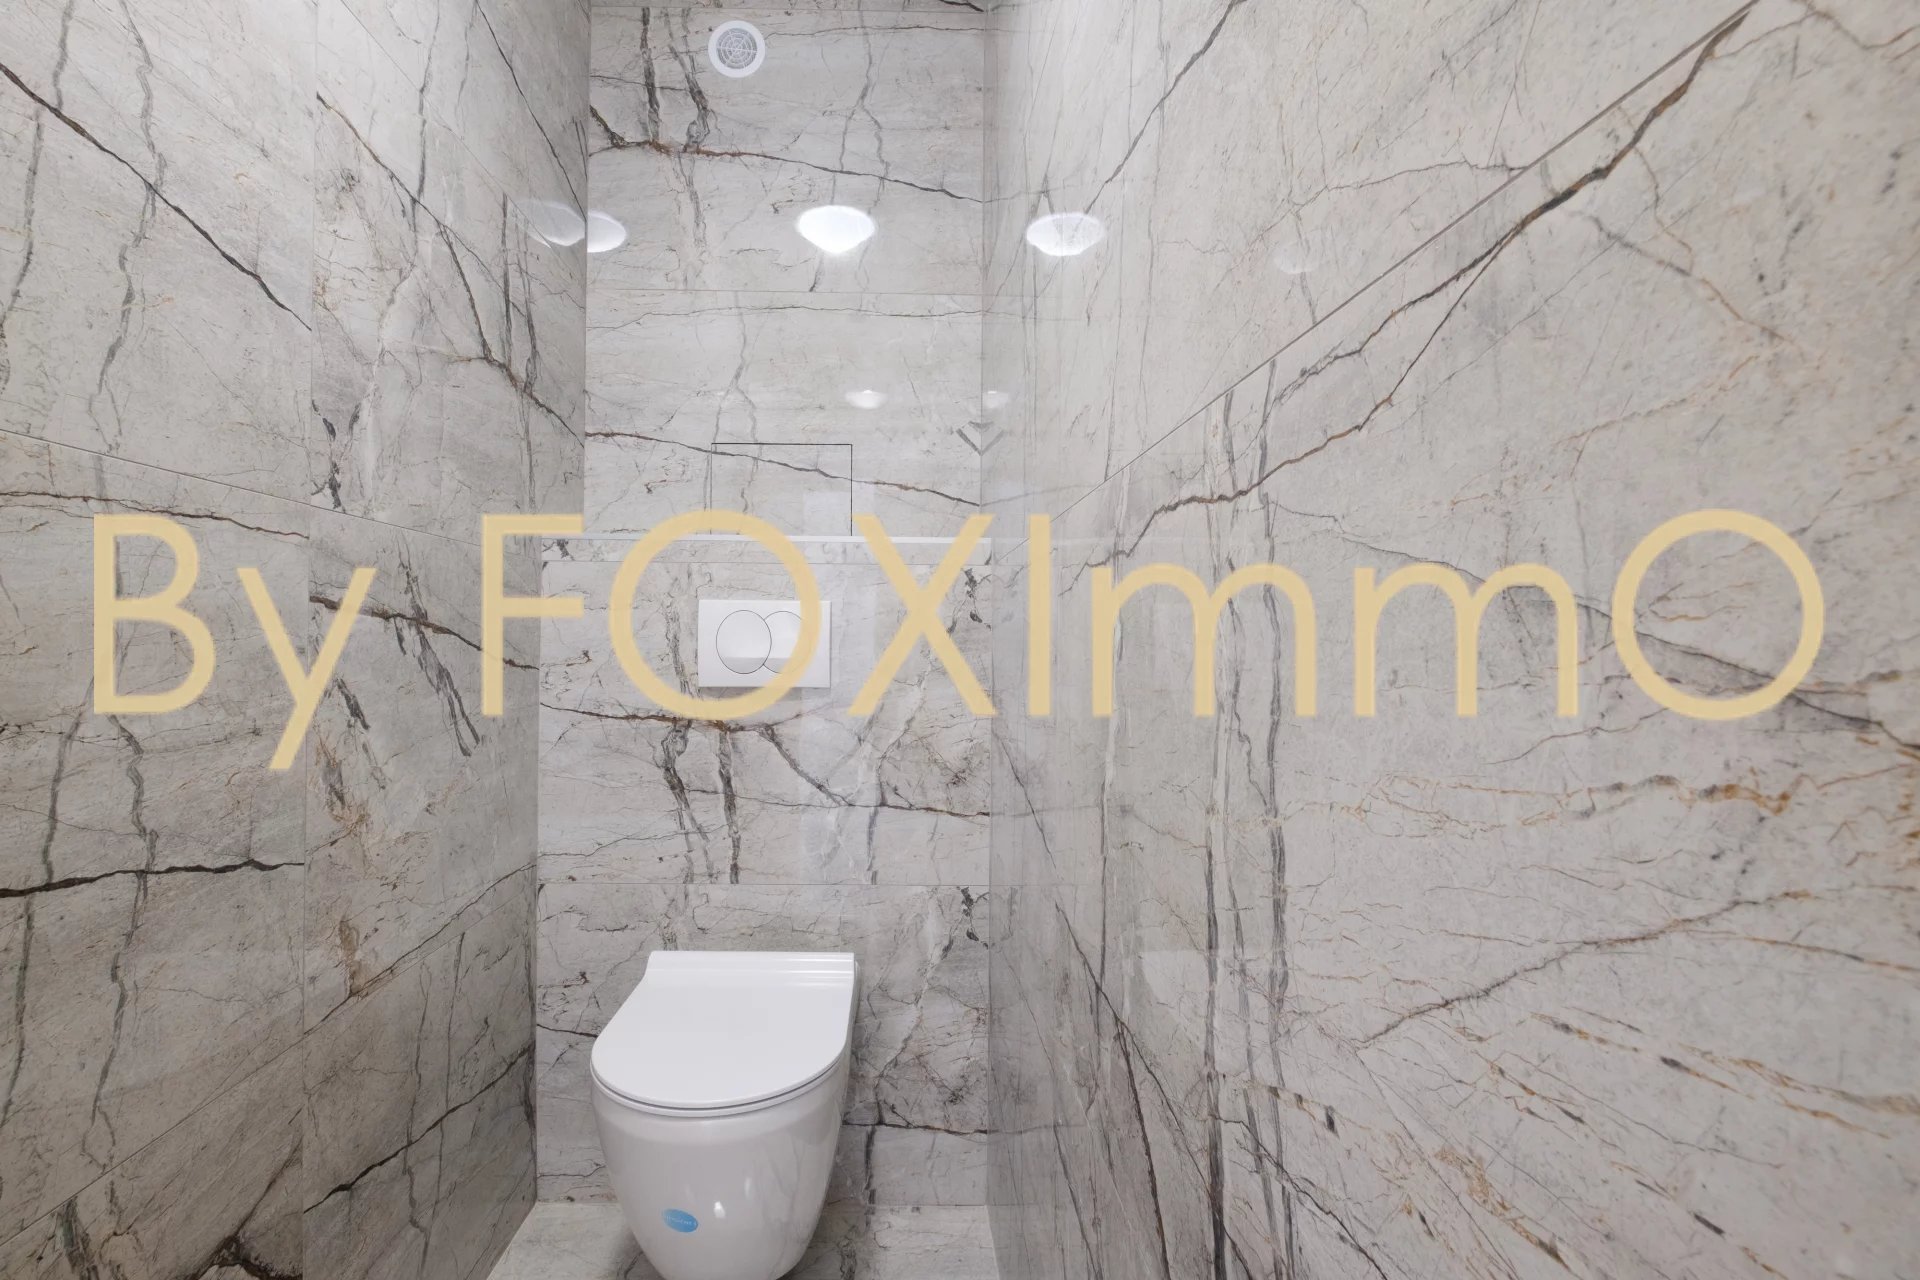 Foximmo Immobilier Nice